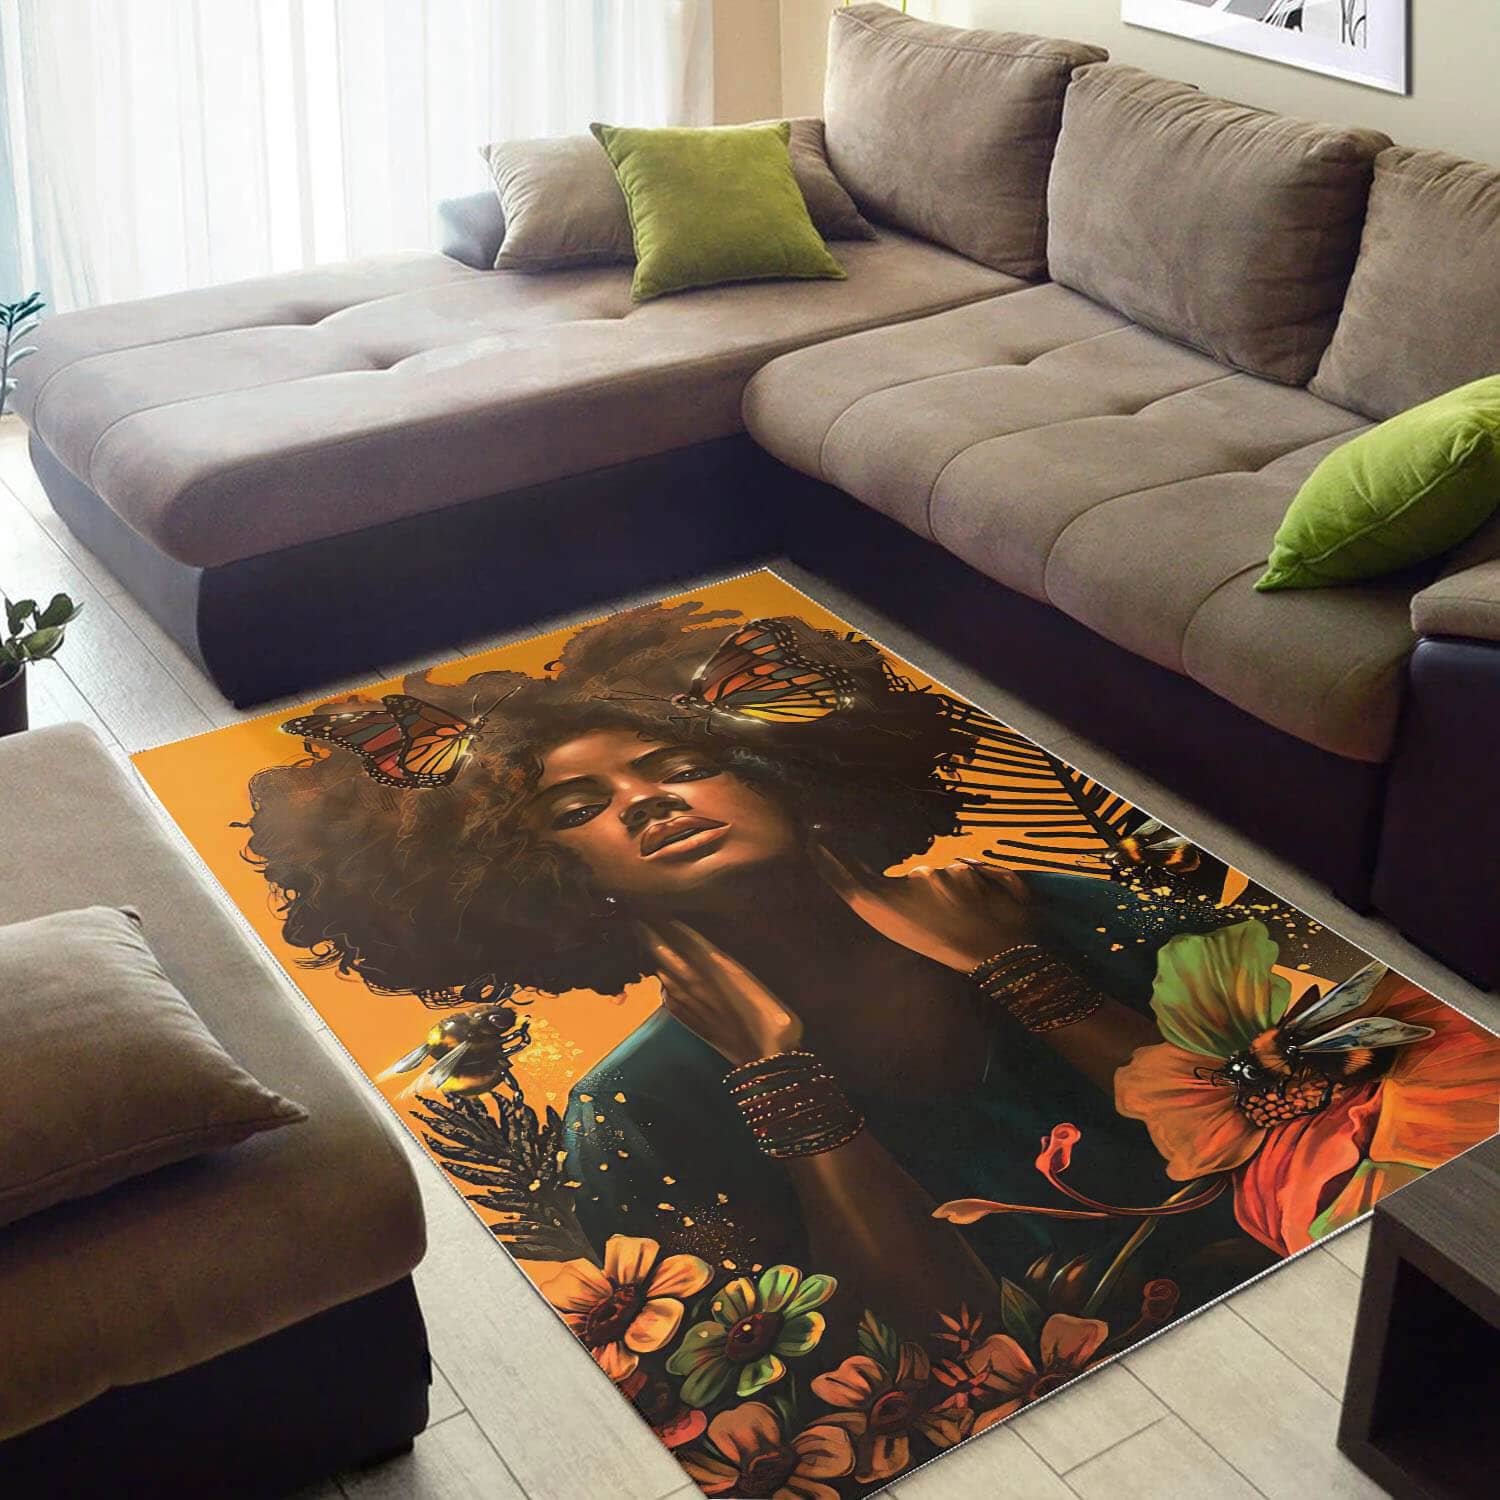 Afrocentric Pretty Afro Woman African Design Floor Decorating Ideas Rug